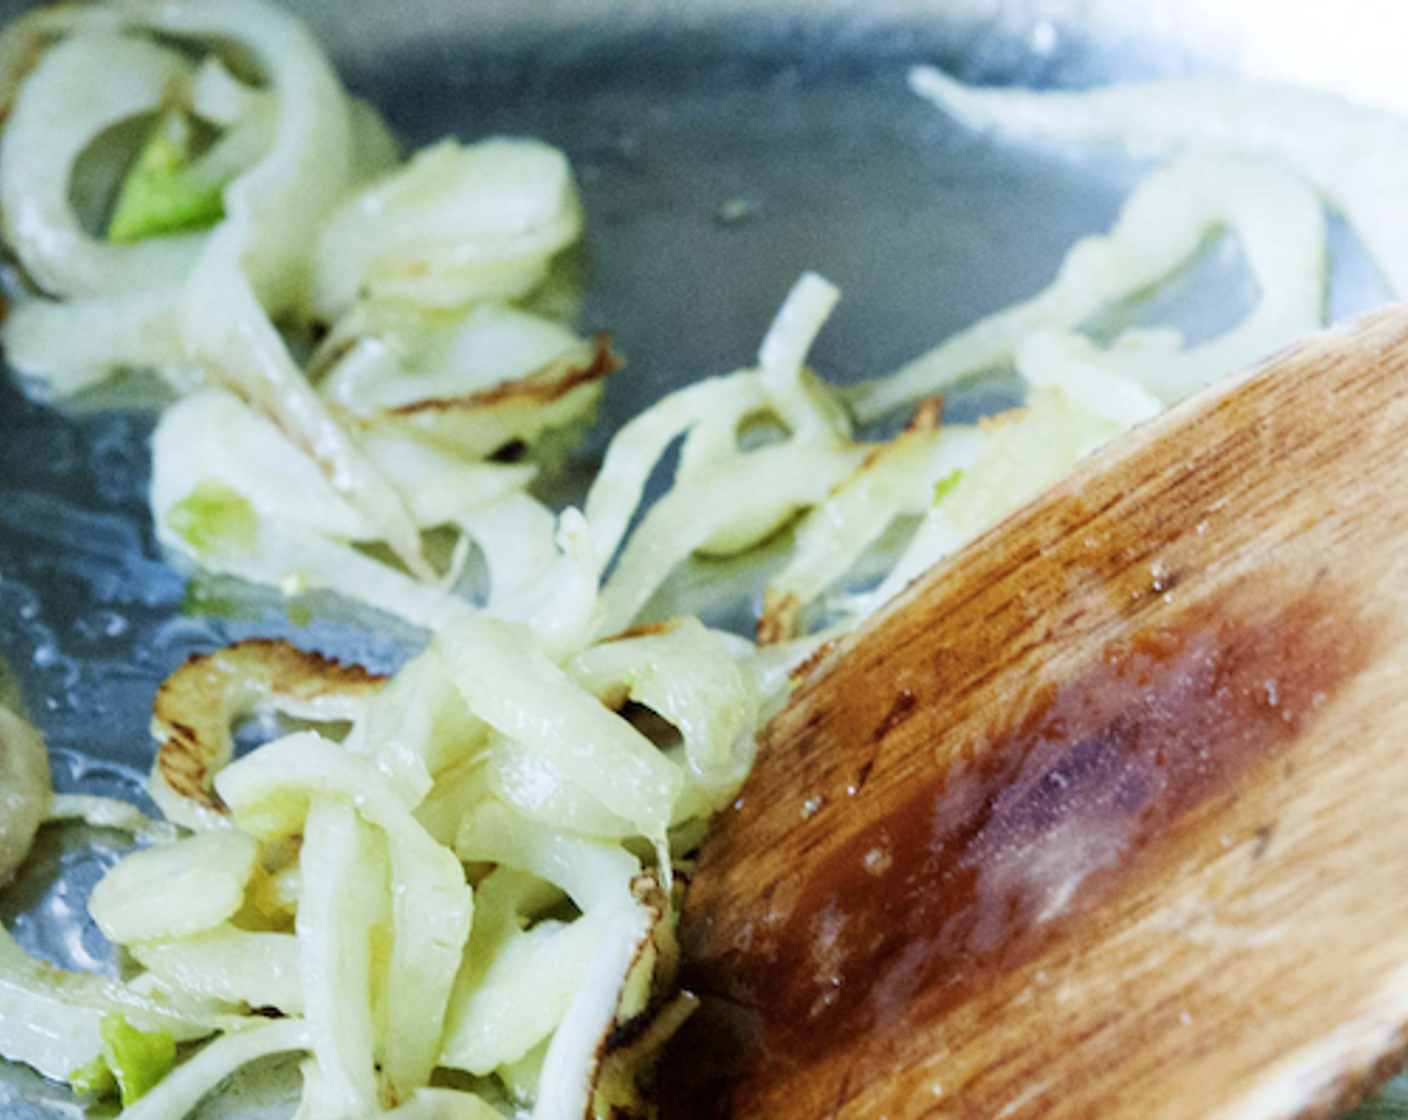 step 3 In a skillet, heat up the Extra-Virgin Olive Oil (2 Tbsp), add the fennel, Brown Sugar (1 tsp) and cook on low until slightly caramelized and fennel is soft.